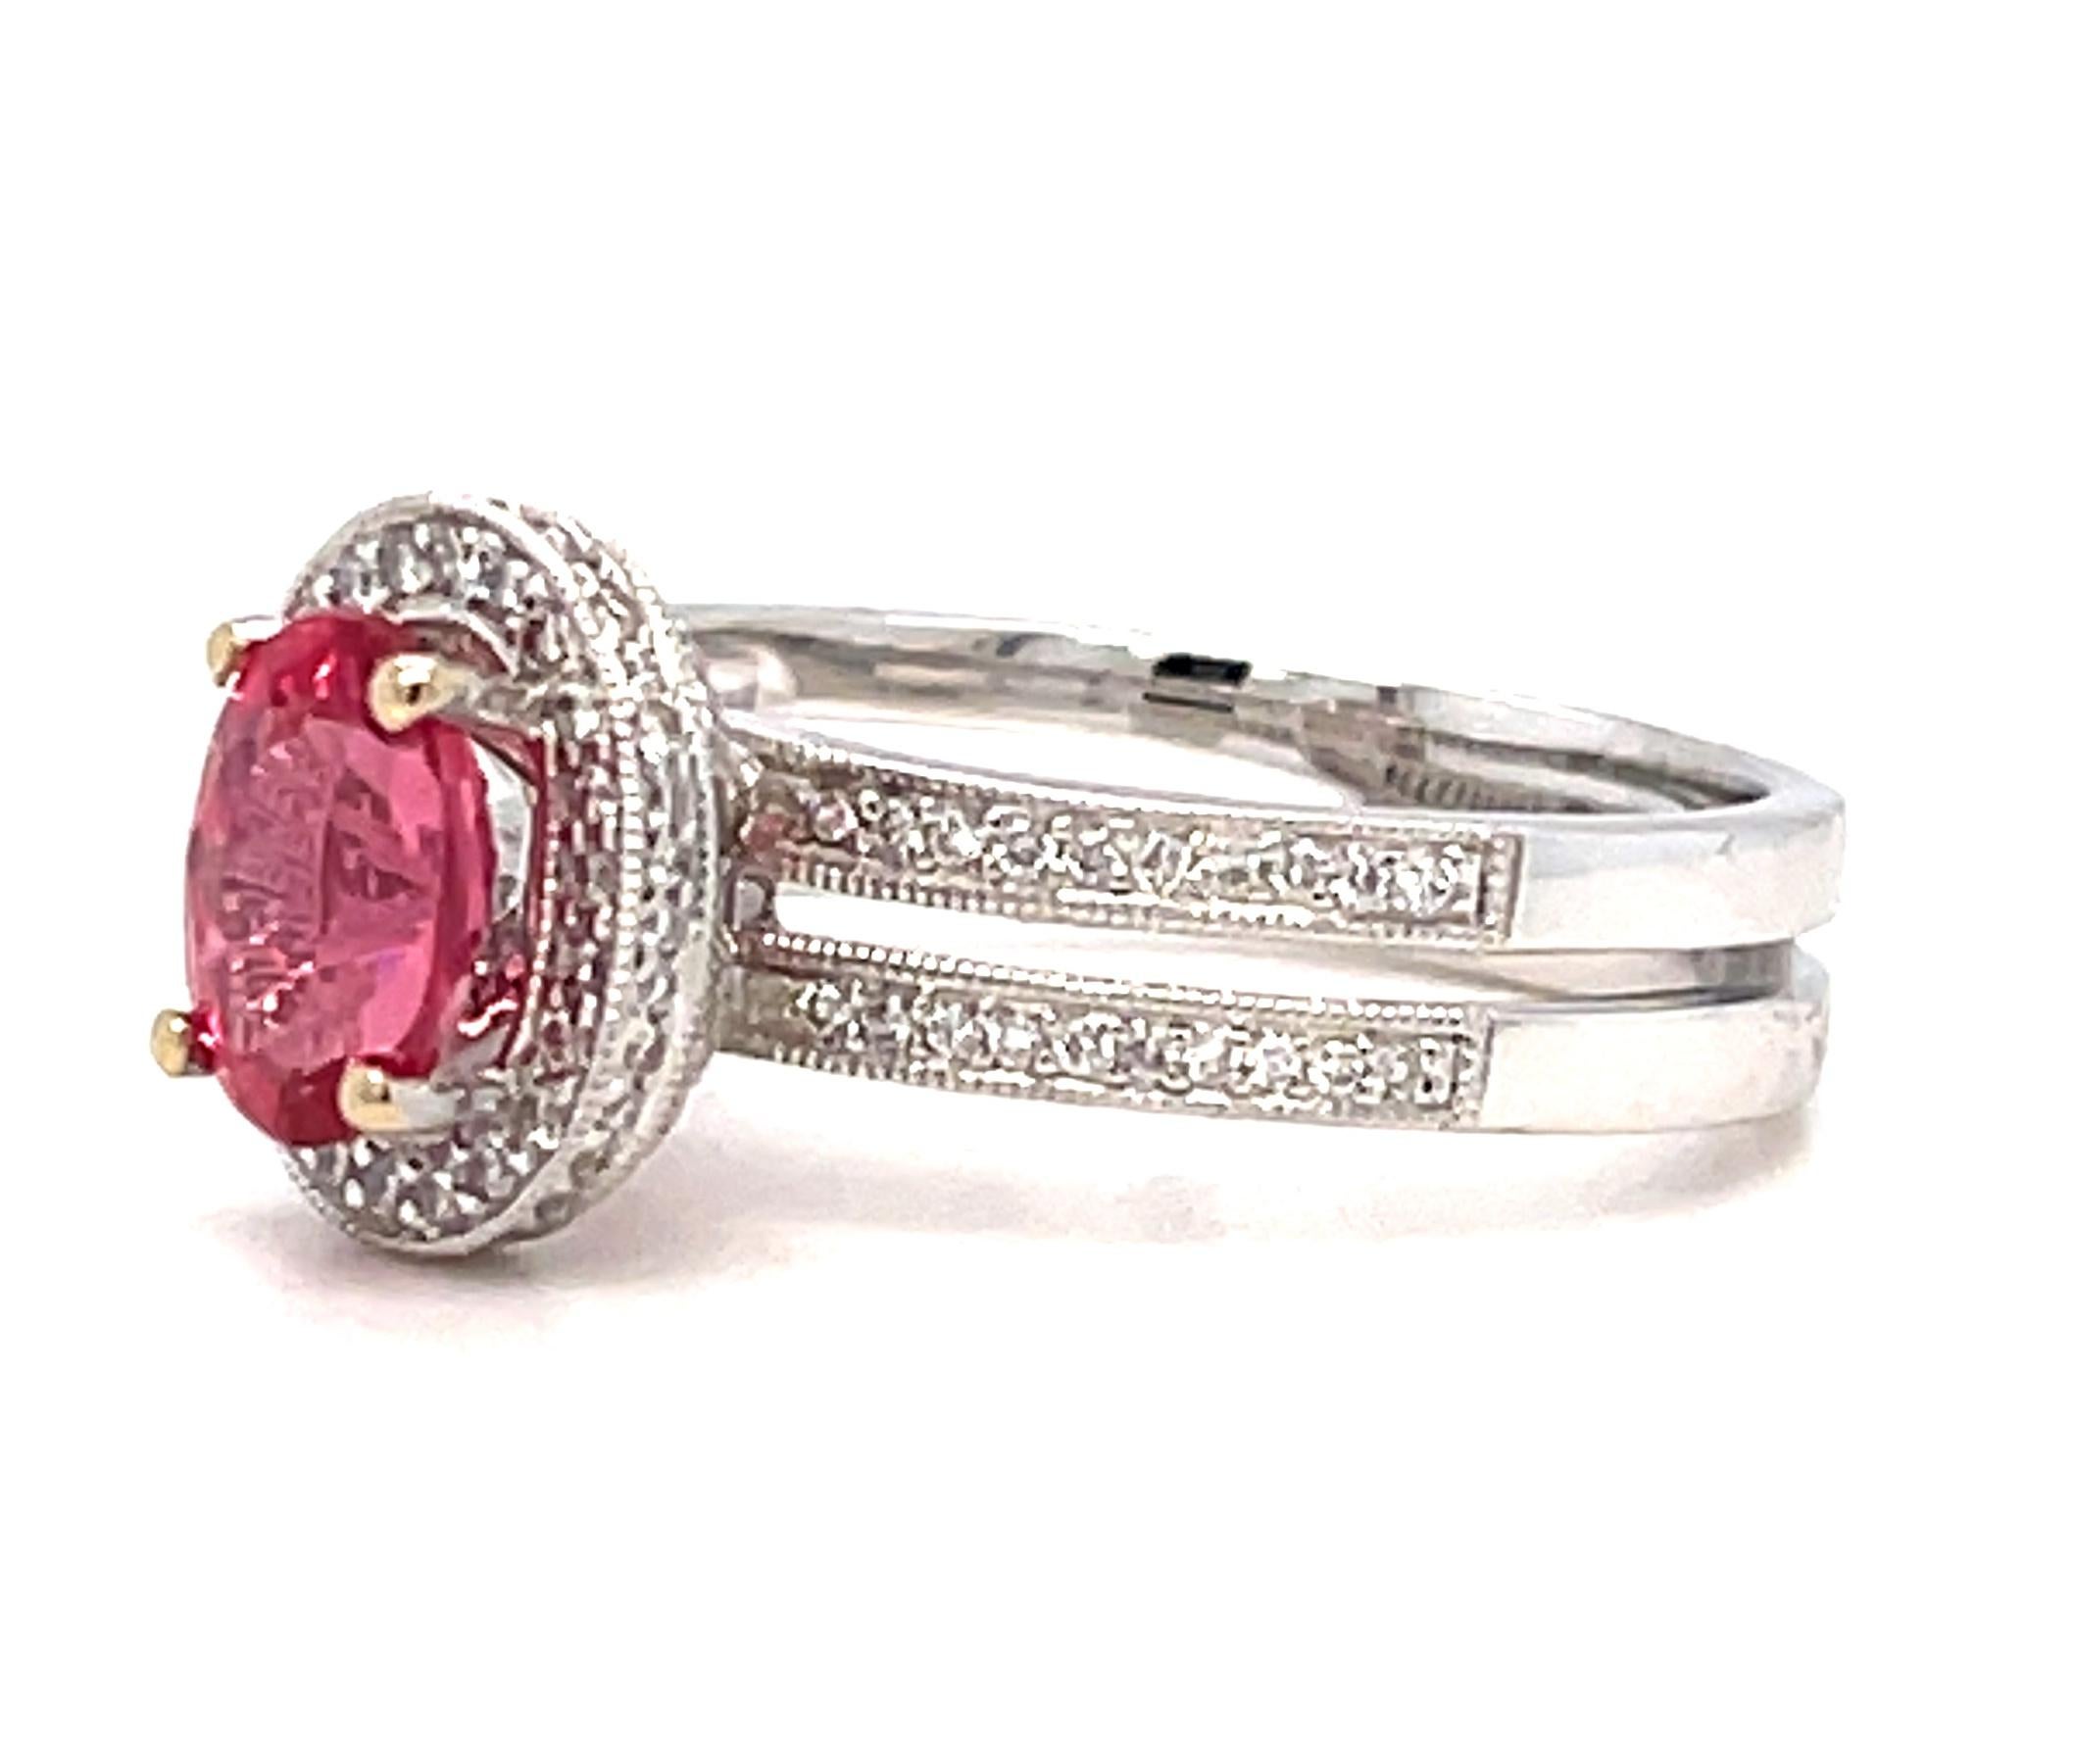 Artisan 1.36 Carat Pink Spinel and Diamond Halo Engagement Ring in 18k White Gold For Sale